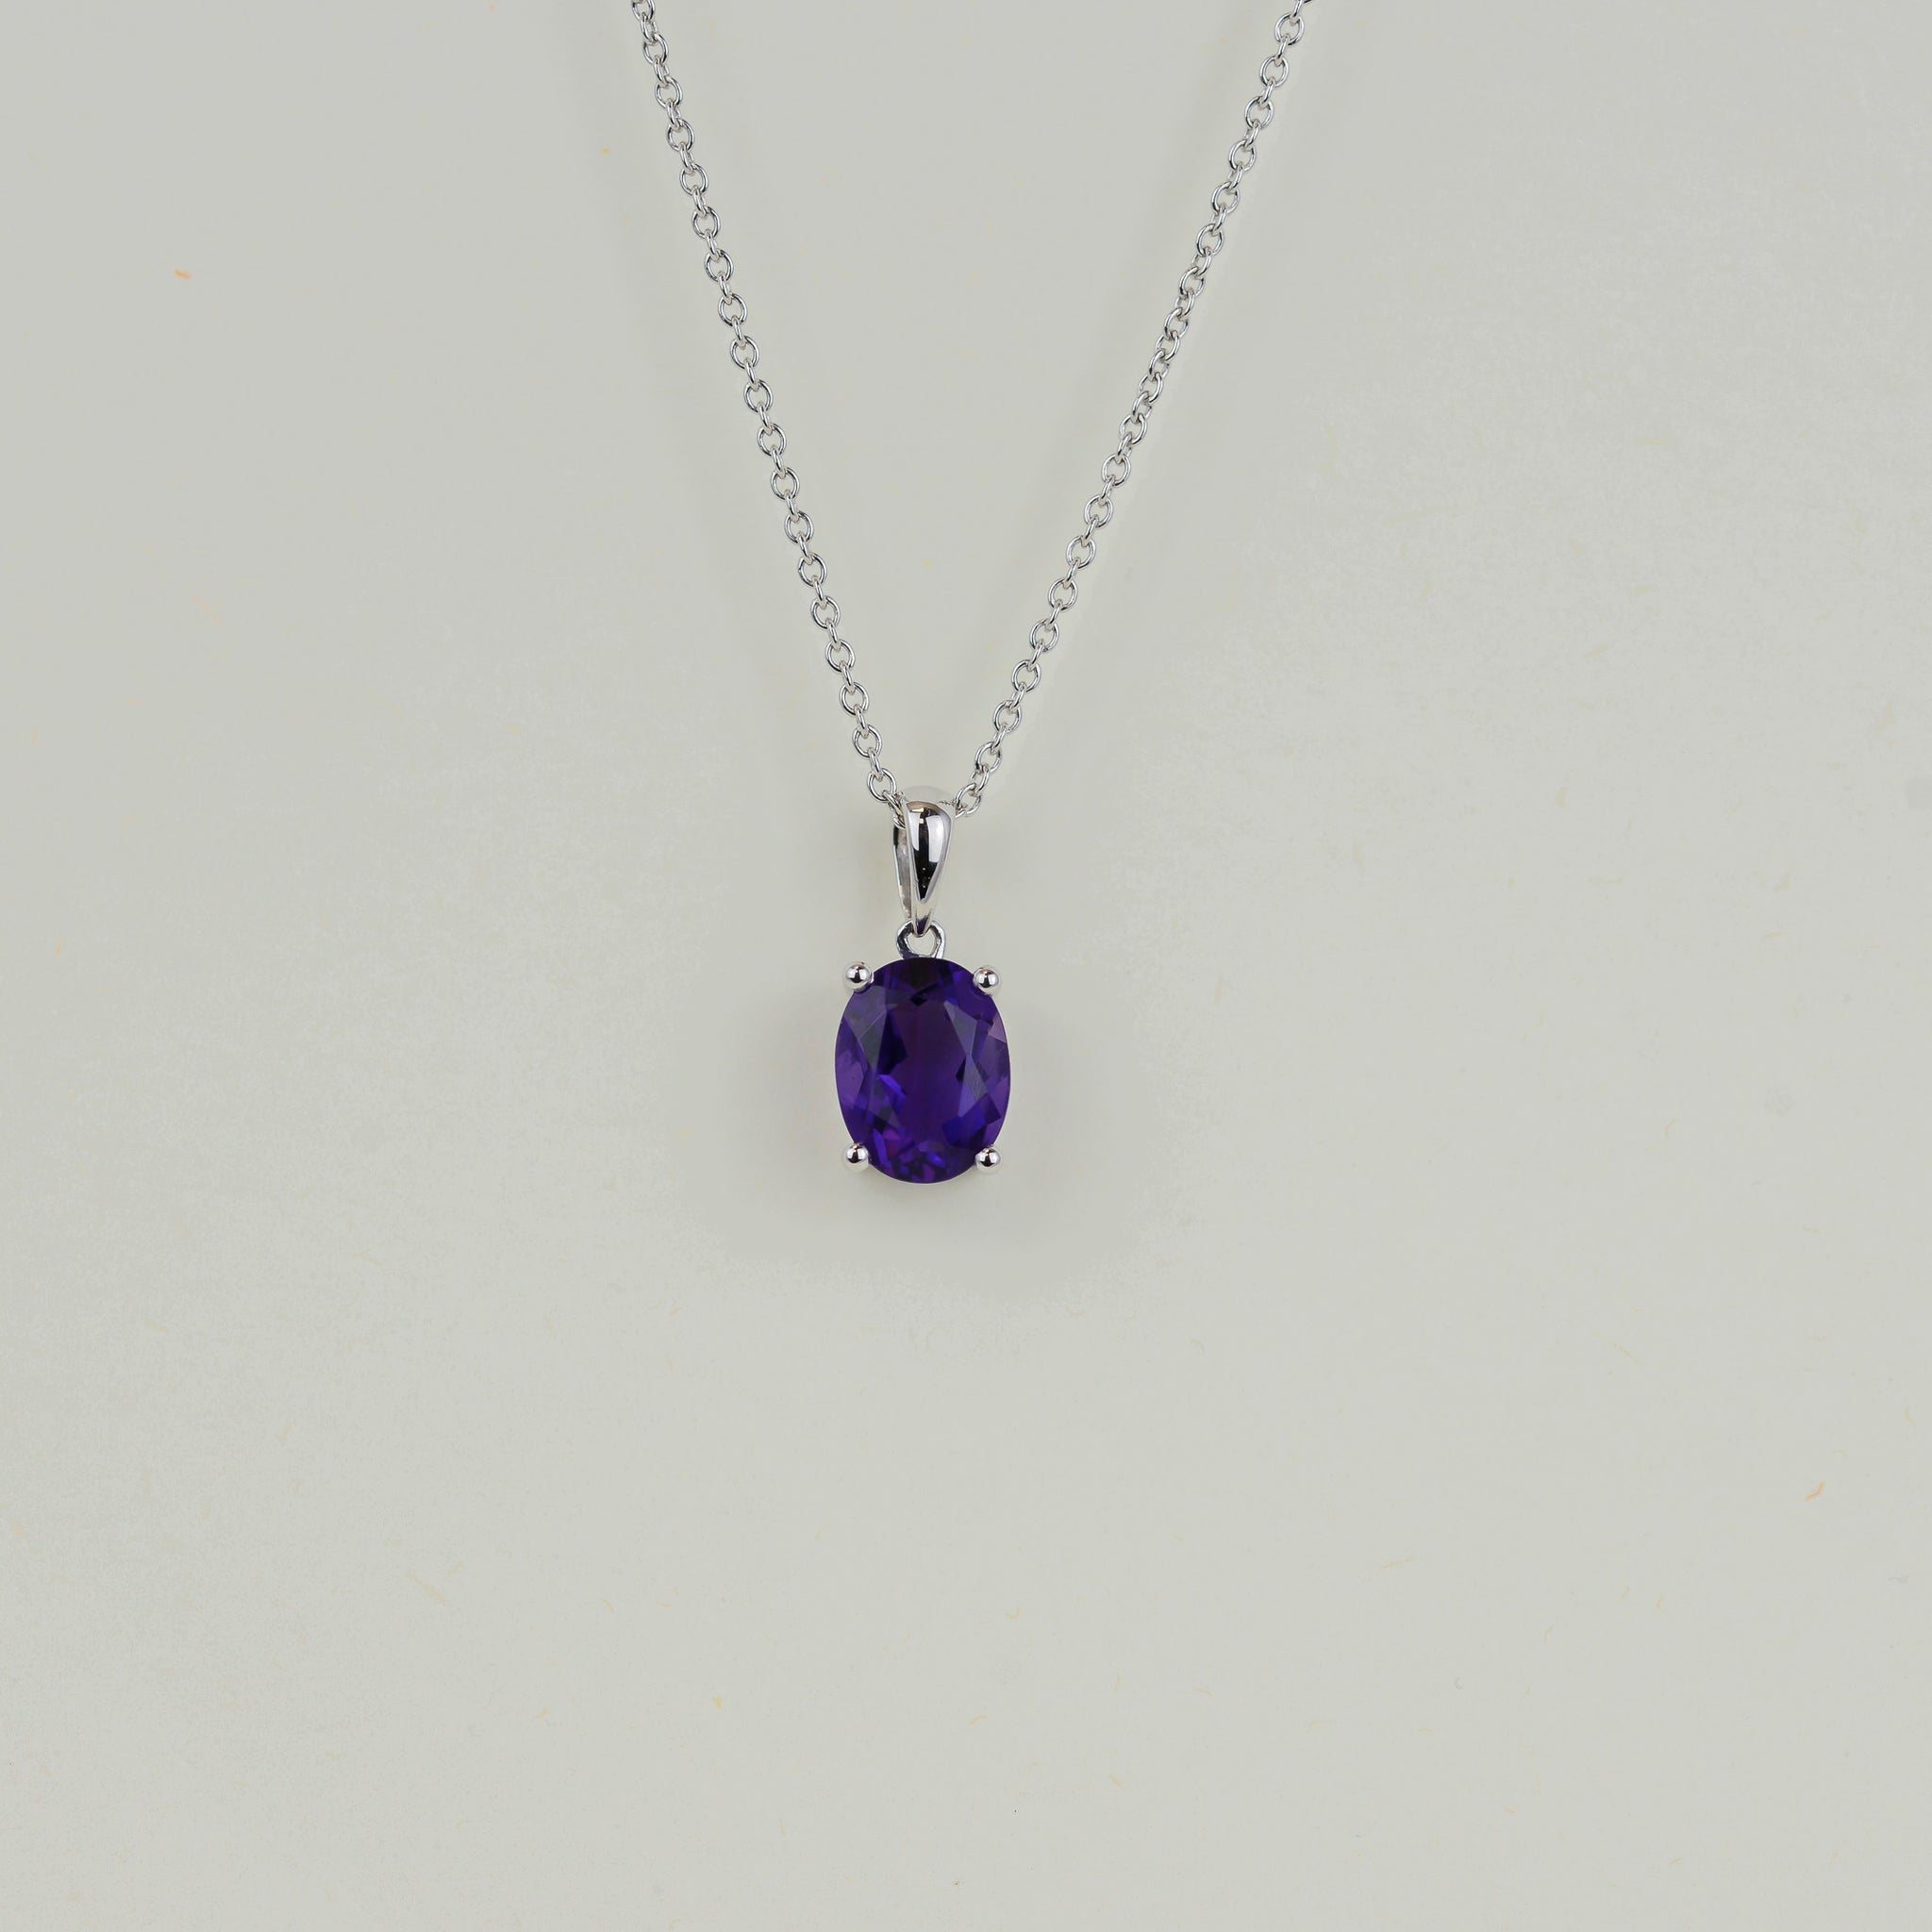 9ct White Gold 1.70ct Oval Amethyst Pendant